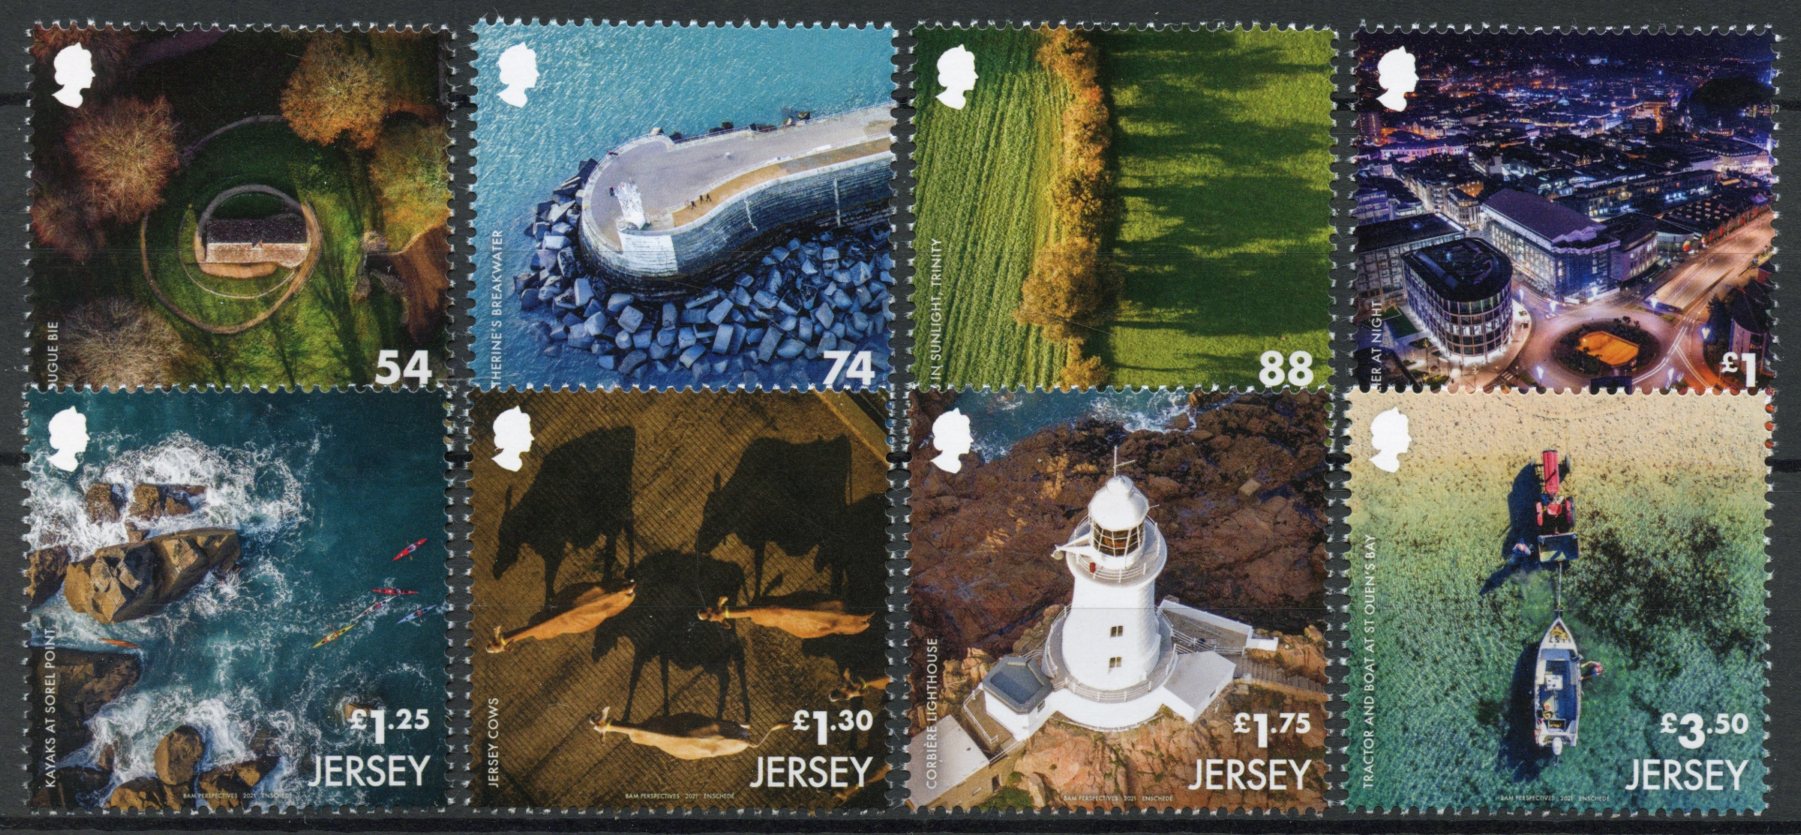 Jersey 2021 MNH Landscapes Stamps From the Air Lighthouses Tourism Cows 8v Set